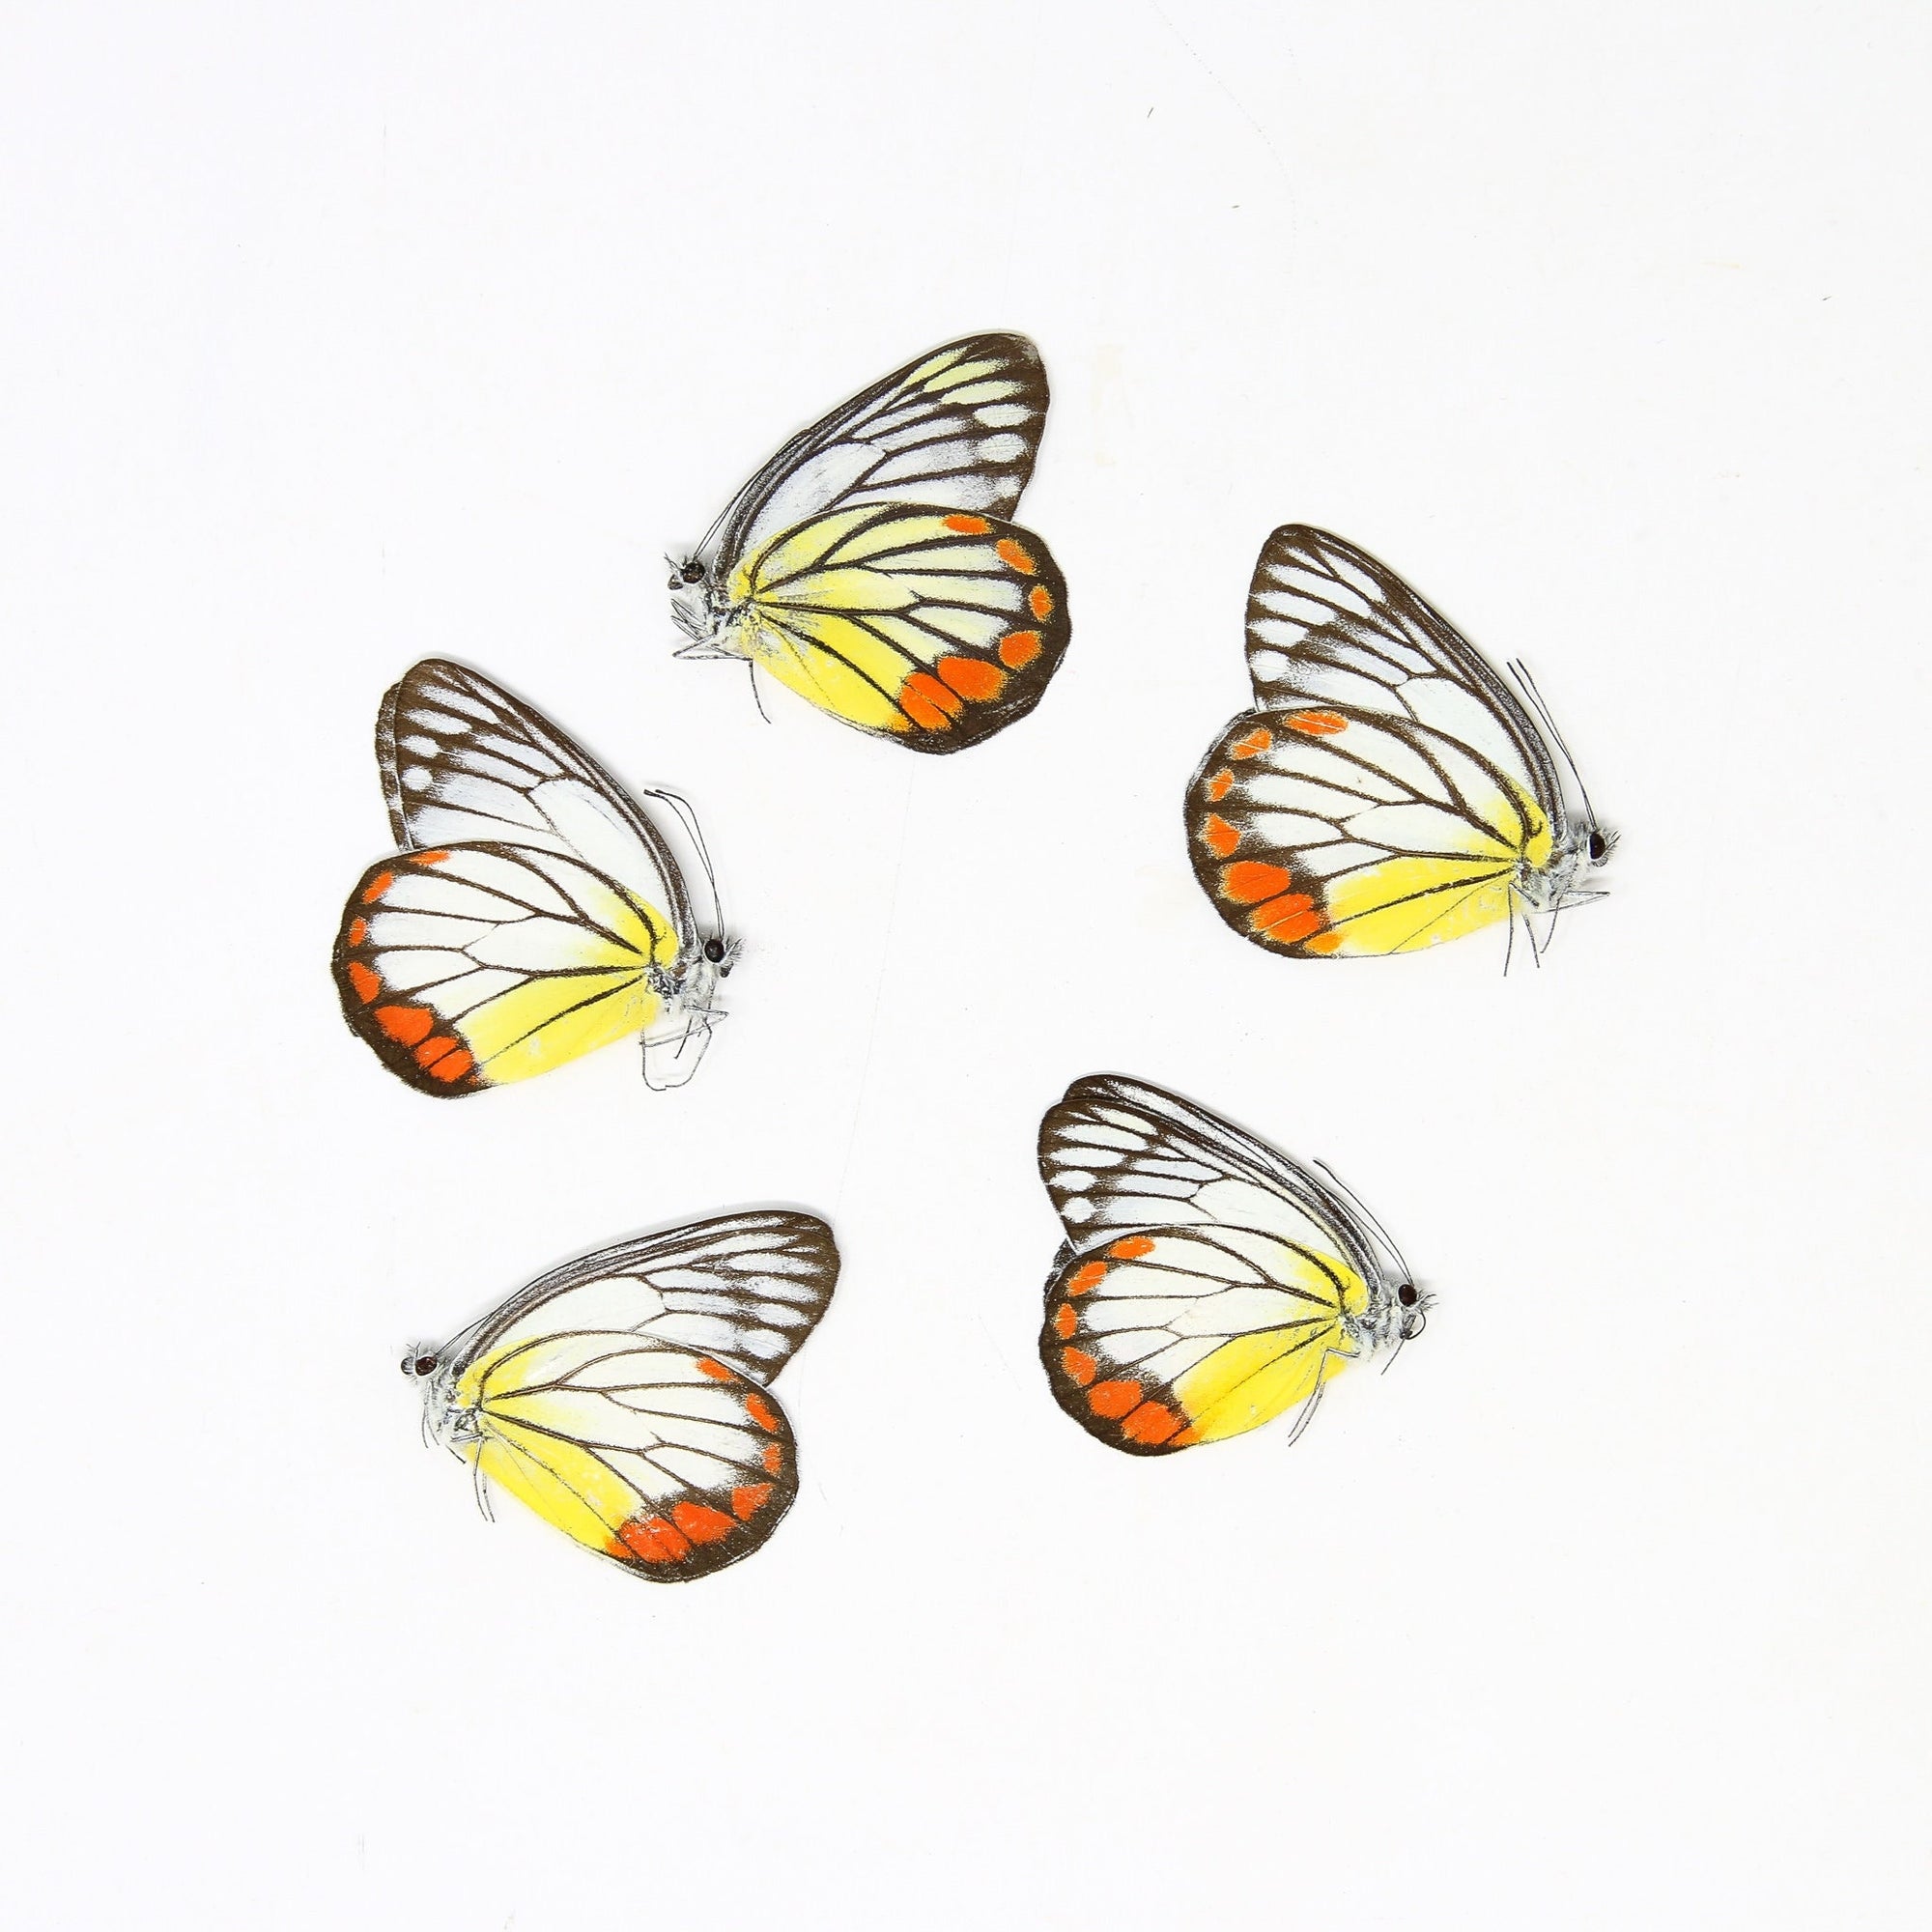 Five (5) Delias hyparete, "Painted Jezebel" A1 Real Dry-Preserved Butterflies, Unmounted Entomology Taxidermy Specimens